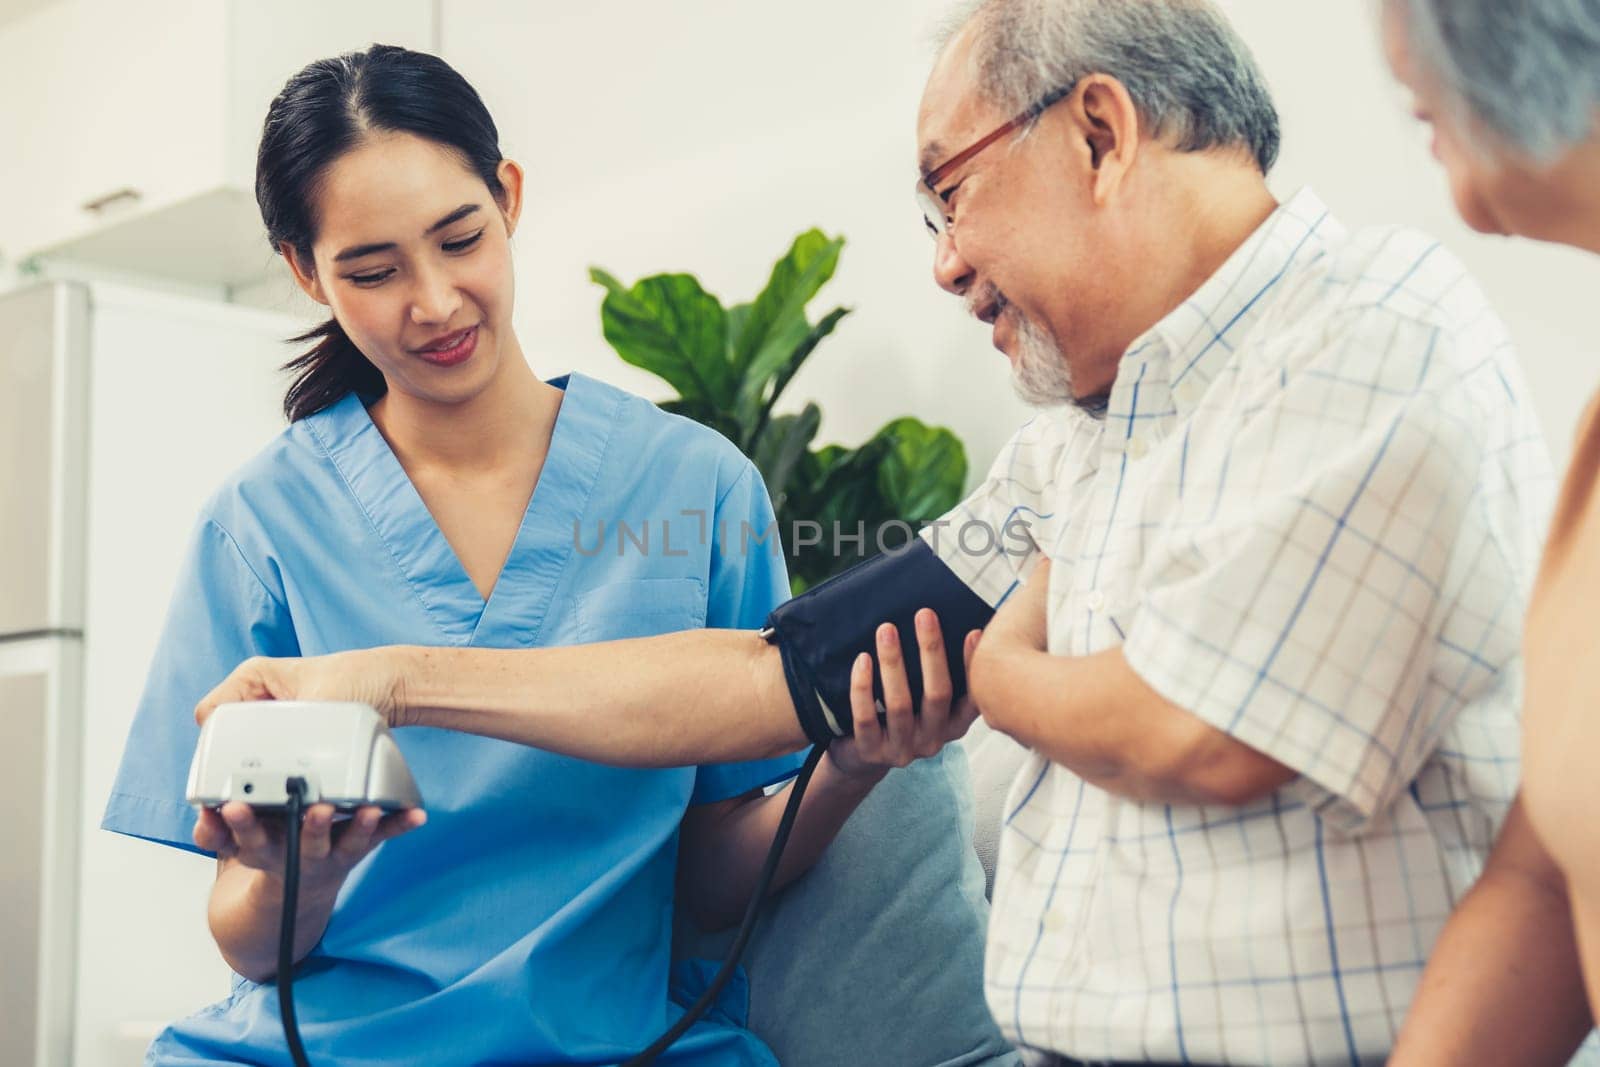 An elderly man having a blood pressure check by his personal caregiver by biancoblue